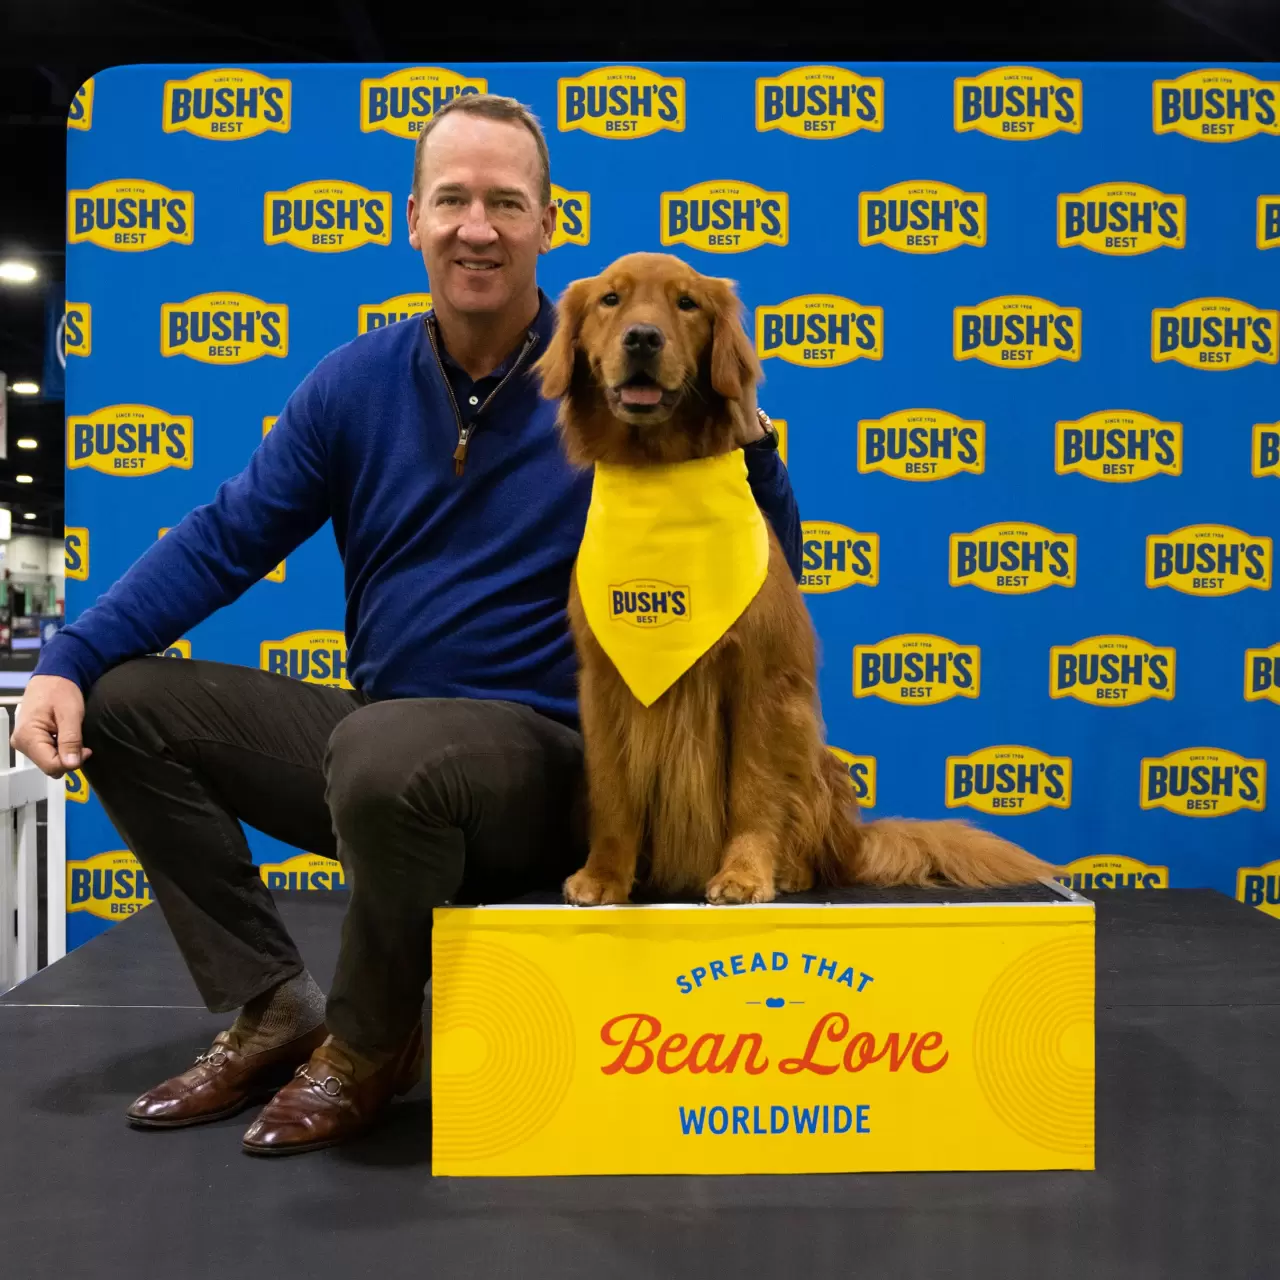 Peyton Manning meets Duke Bush, Bush’s® one and only spokesdog, for the first time ahead of working together on a partnership to elevate the beautiful bean. img#1